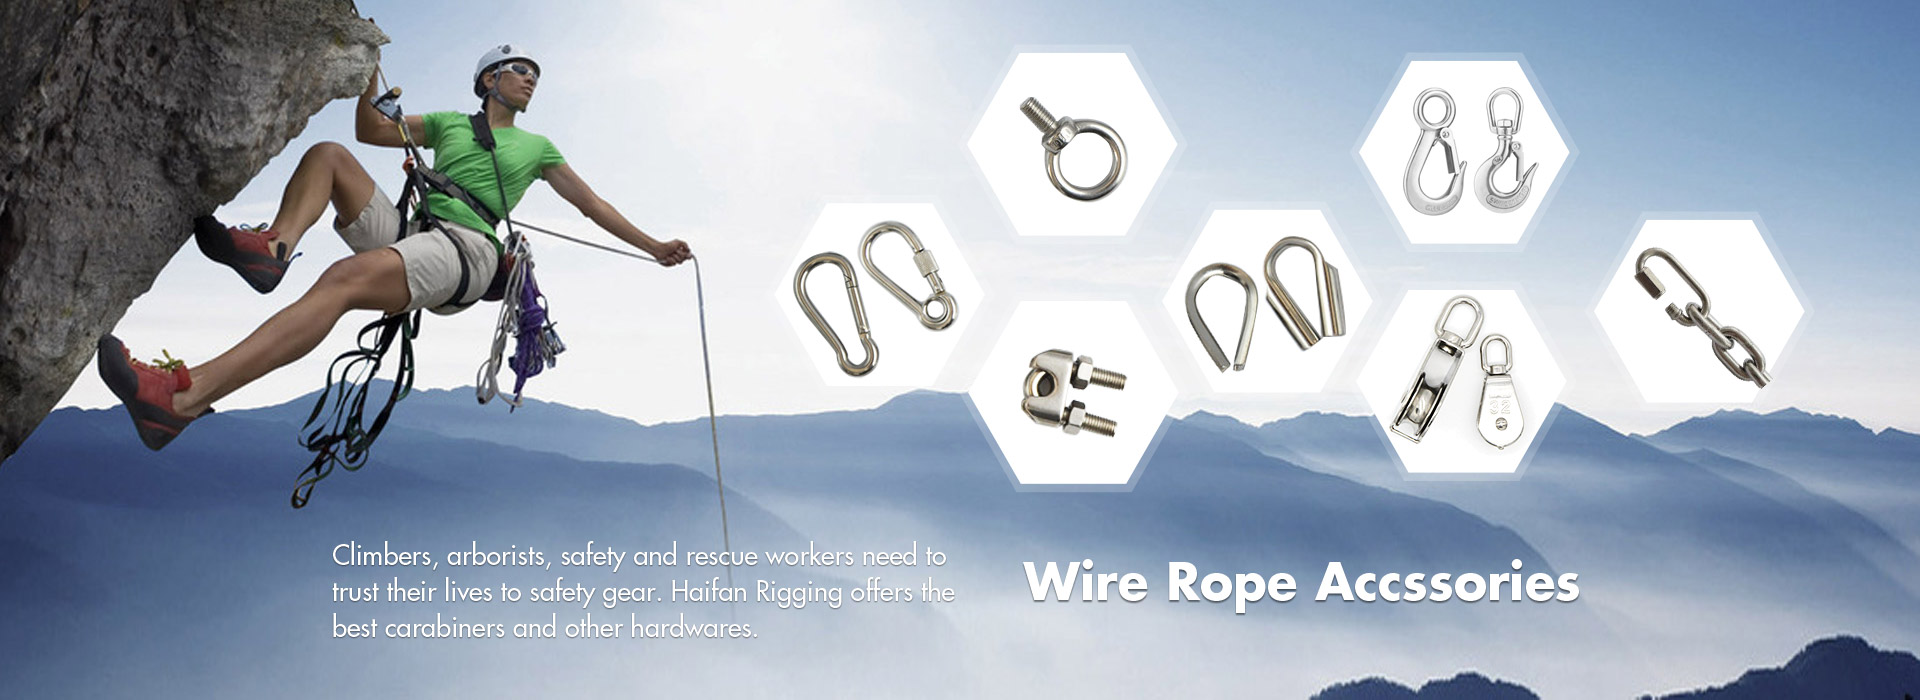 Wire Rope Accssories